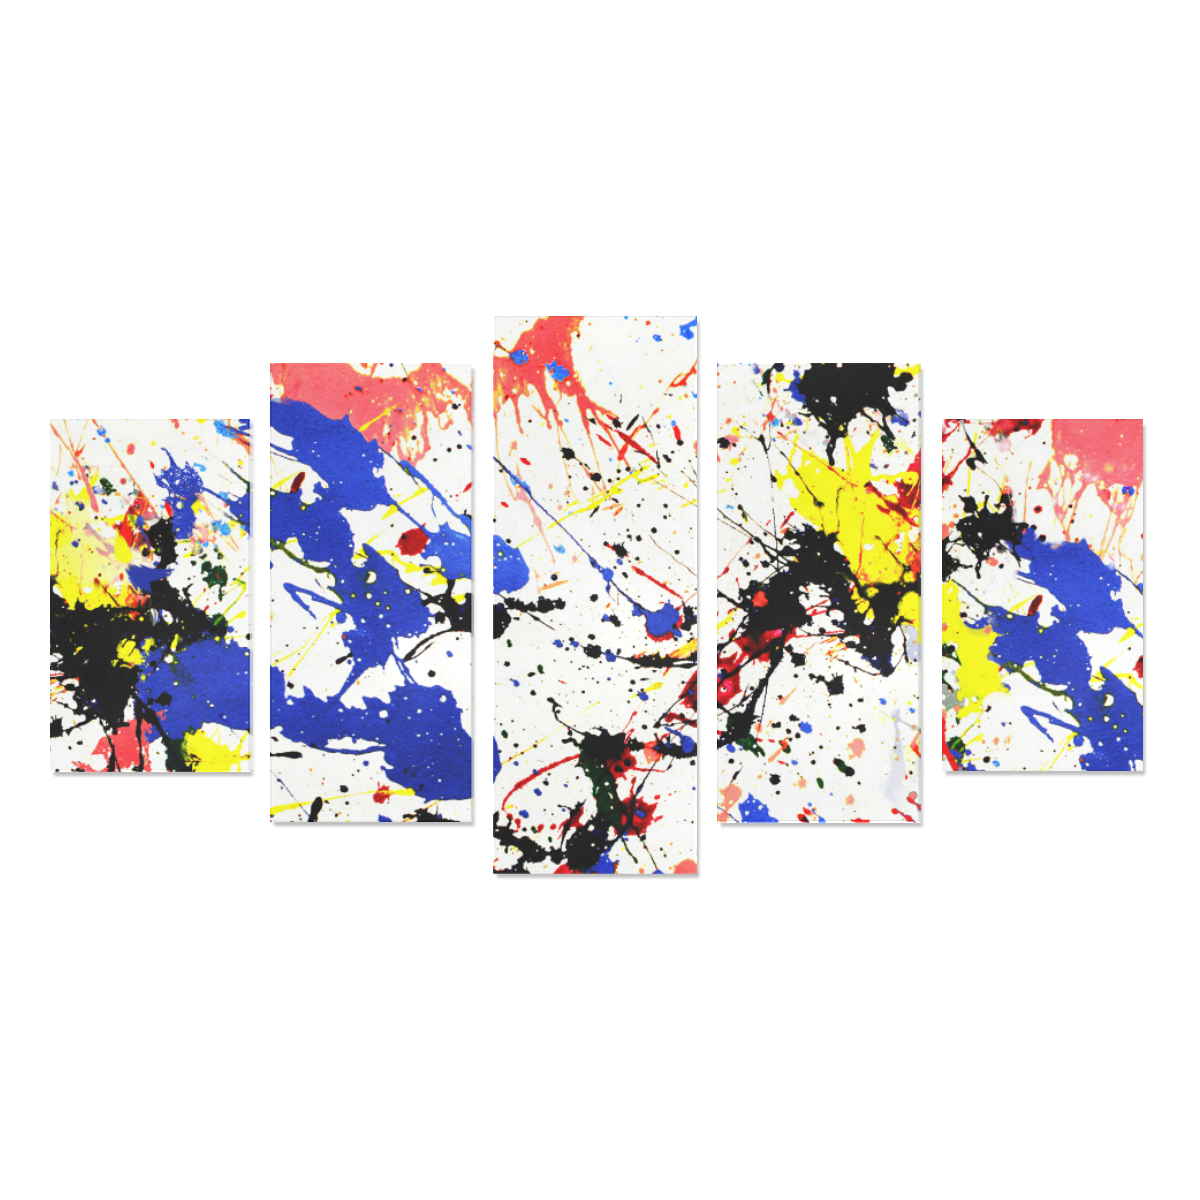 Blue and Red Paint Splatter Canvas Print Sets A (No Frame)